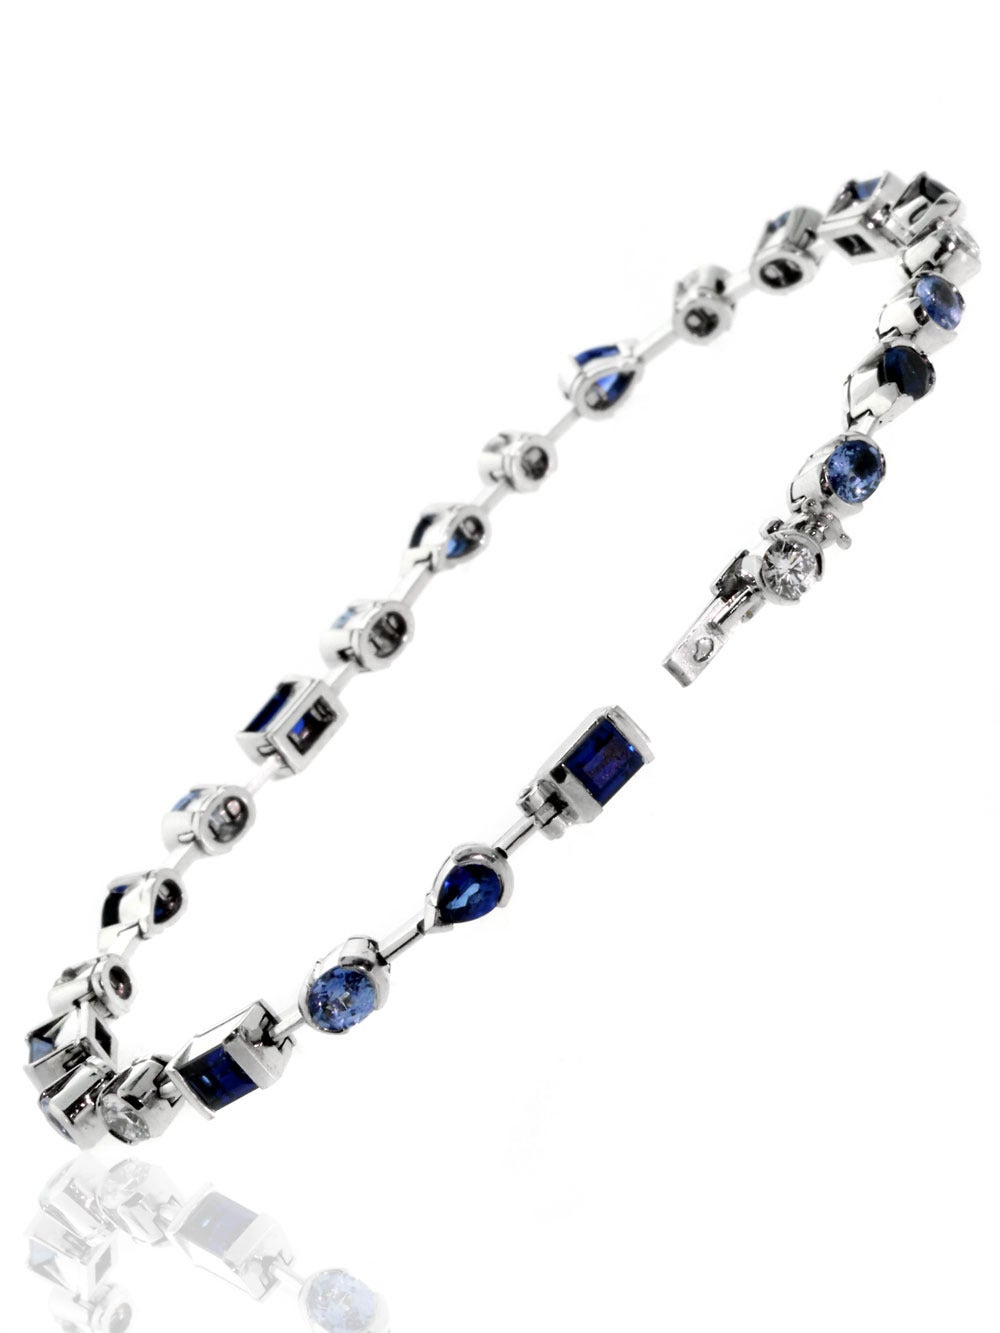 A fabulous authentic Cartier tennis bracelet featuring a mix of rich blue sapphires (3.79ct) and the finest round brilliant cut diamonds (.63ct) set in 18k white gold.

Length: 6 1/2″
Dimensions: .13